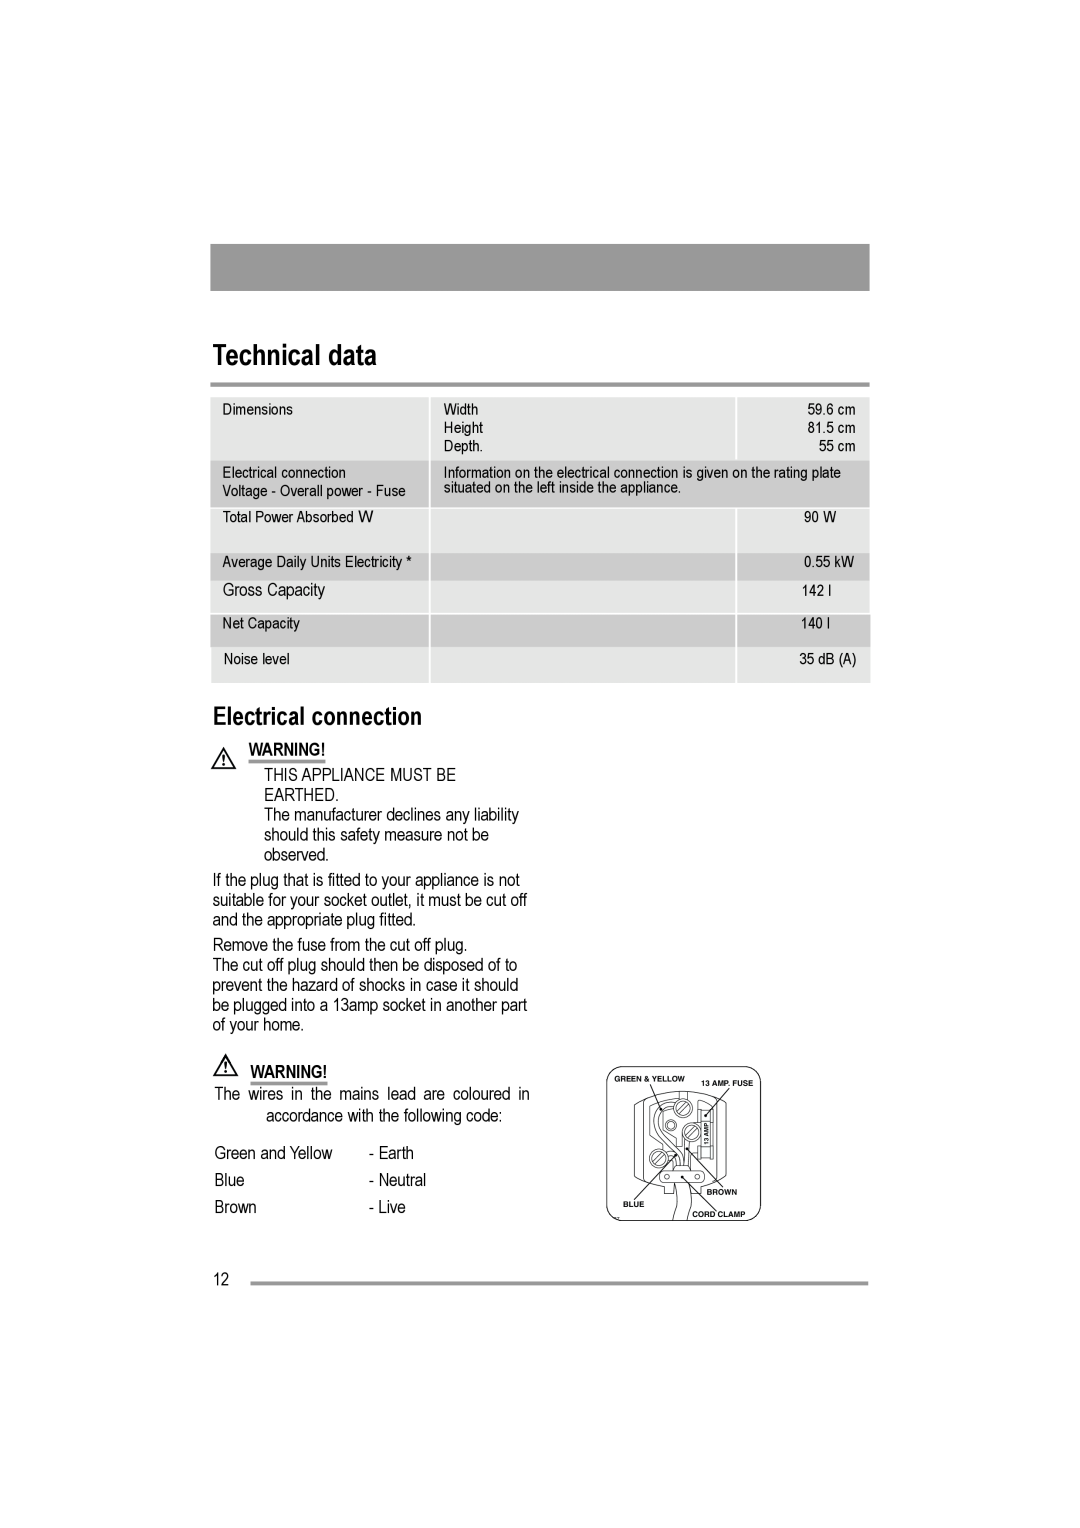 Moffat MUL 514 user manual Technical data, Electrical connection 